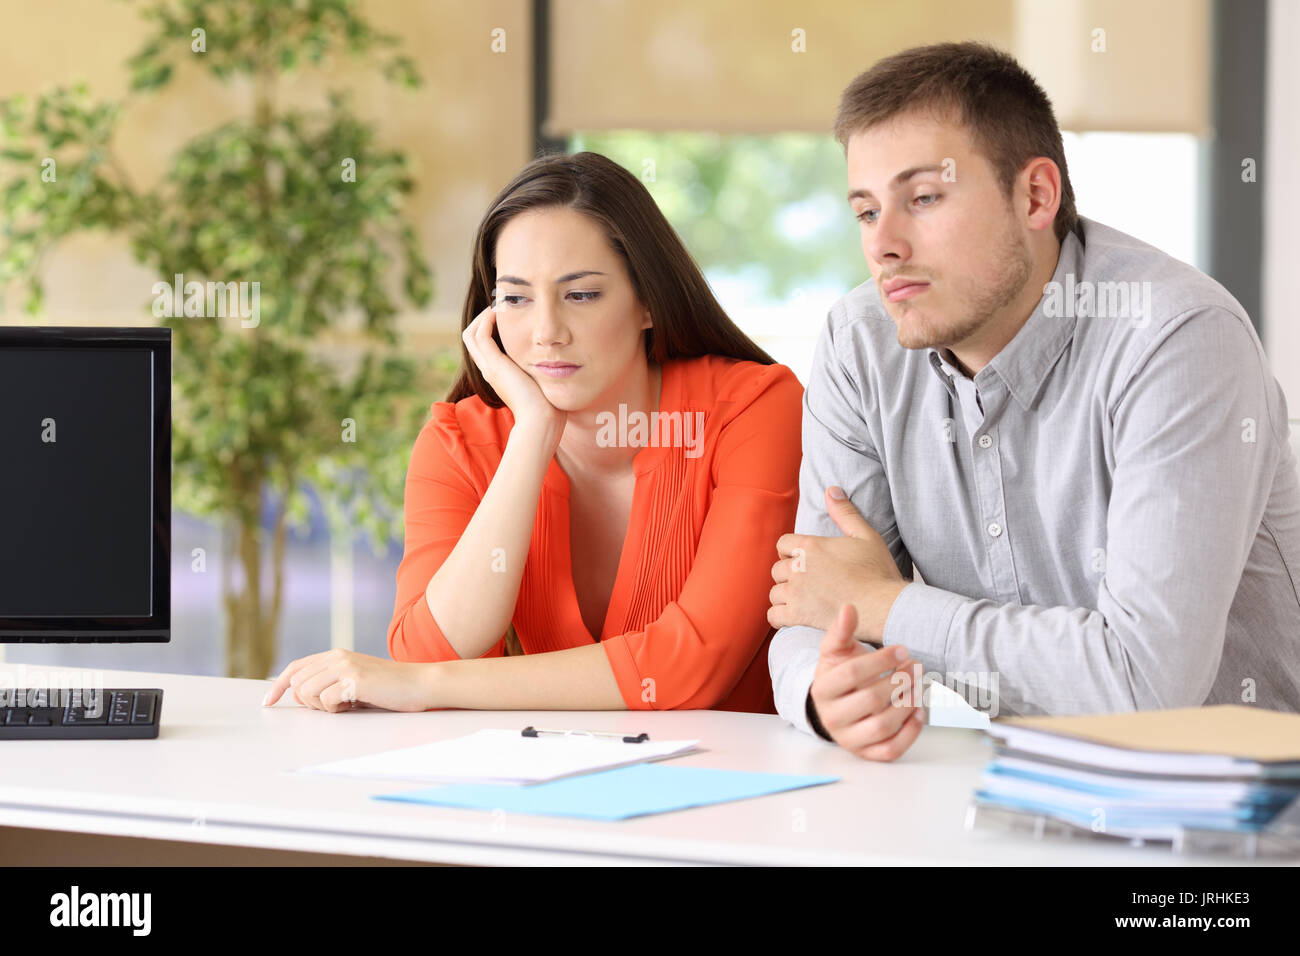 Two bored customers waiting for attendance at office Stock Photo